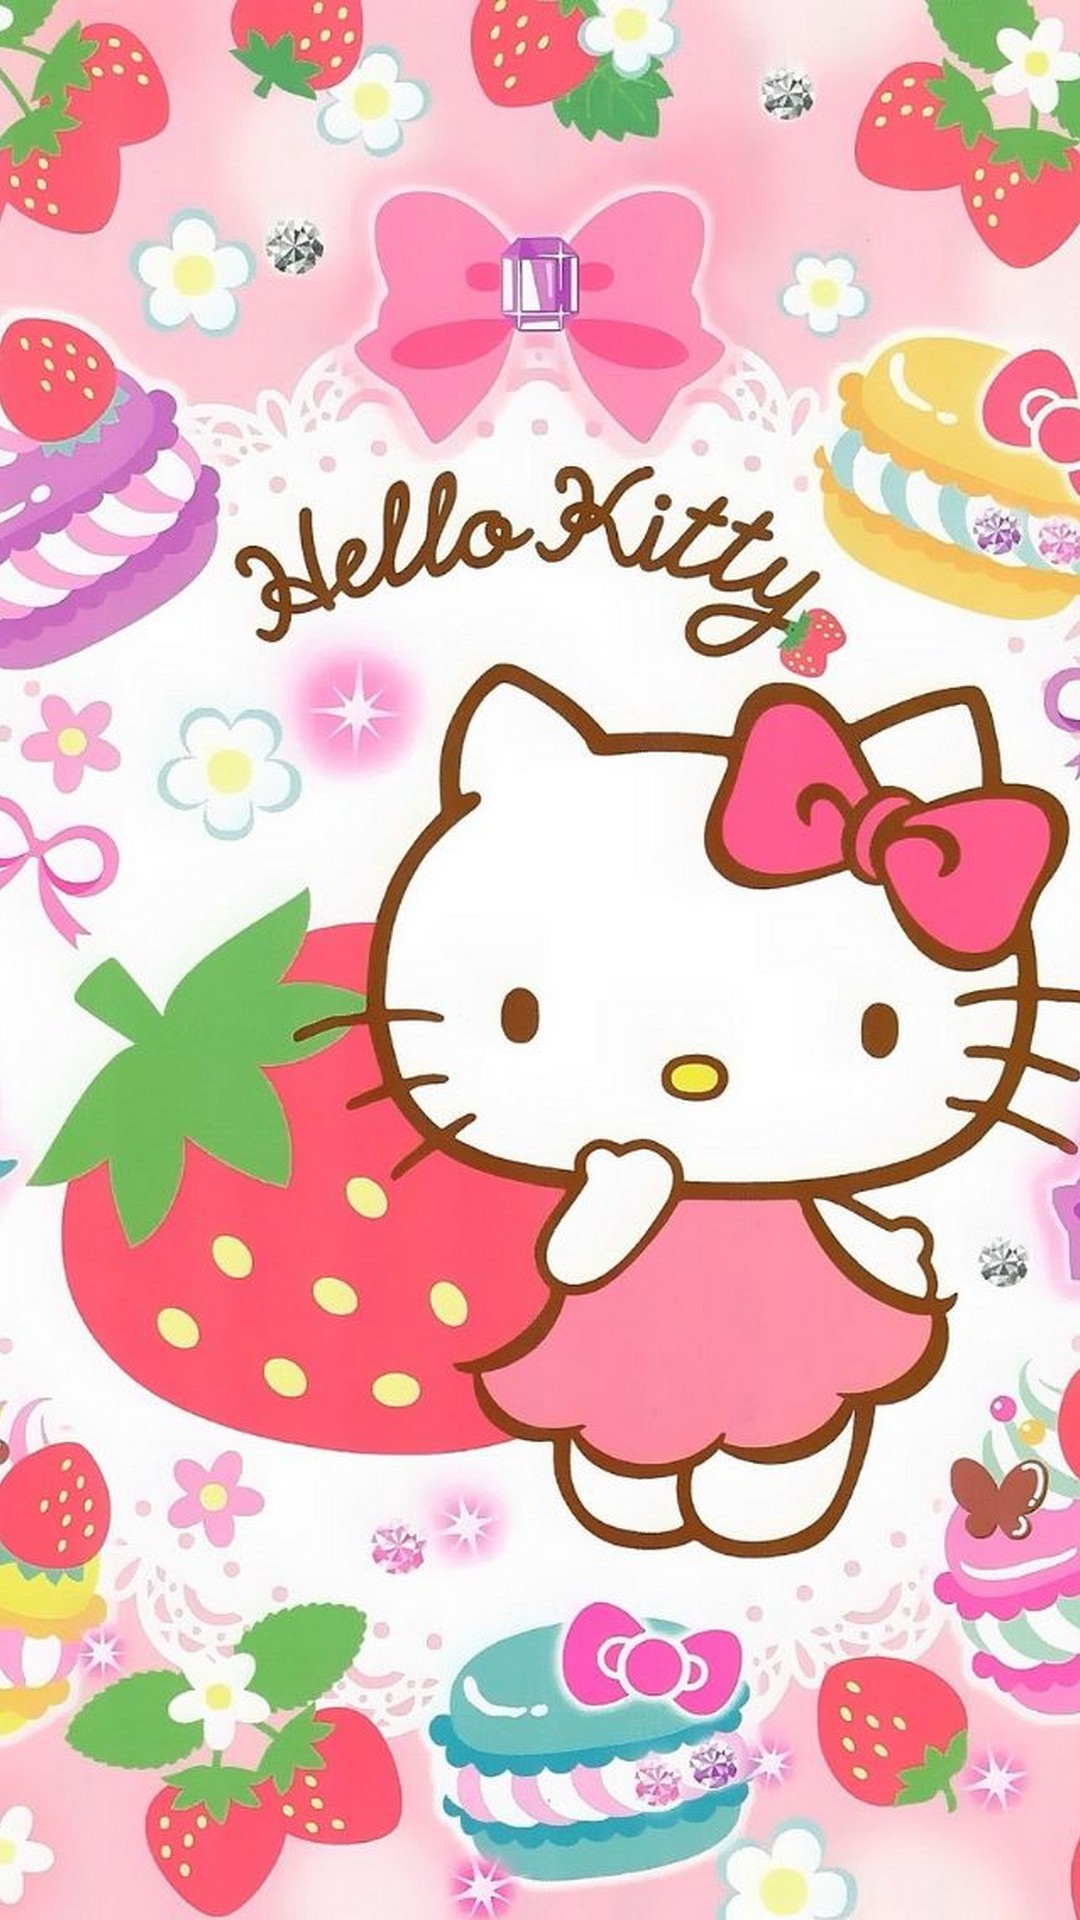 Hello Kitty Images Android Wallpaper with image resolution 1080x1920 pixel. You can make this wallpaper for your Android backgrounds, Tablet, Smartphones Screensavers and Mobile Phone Lock Screen